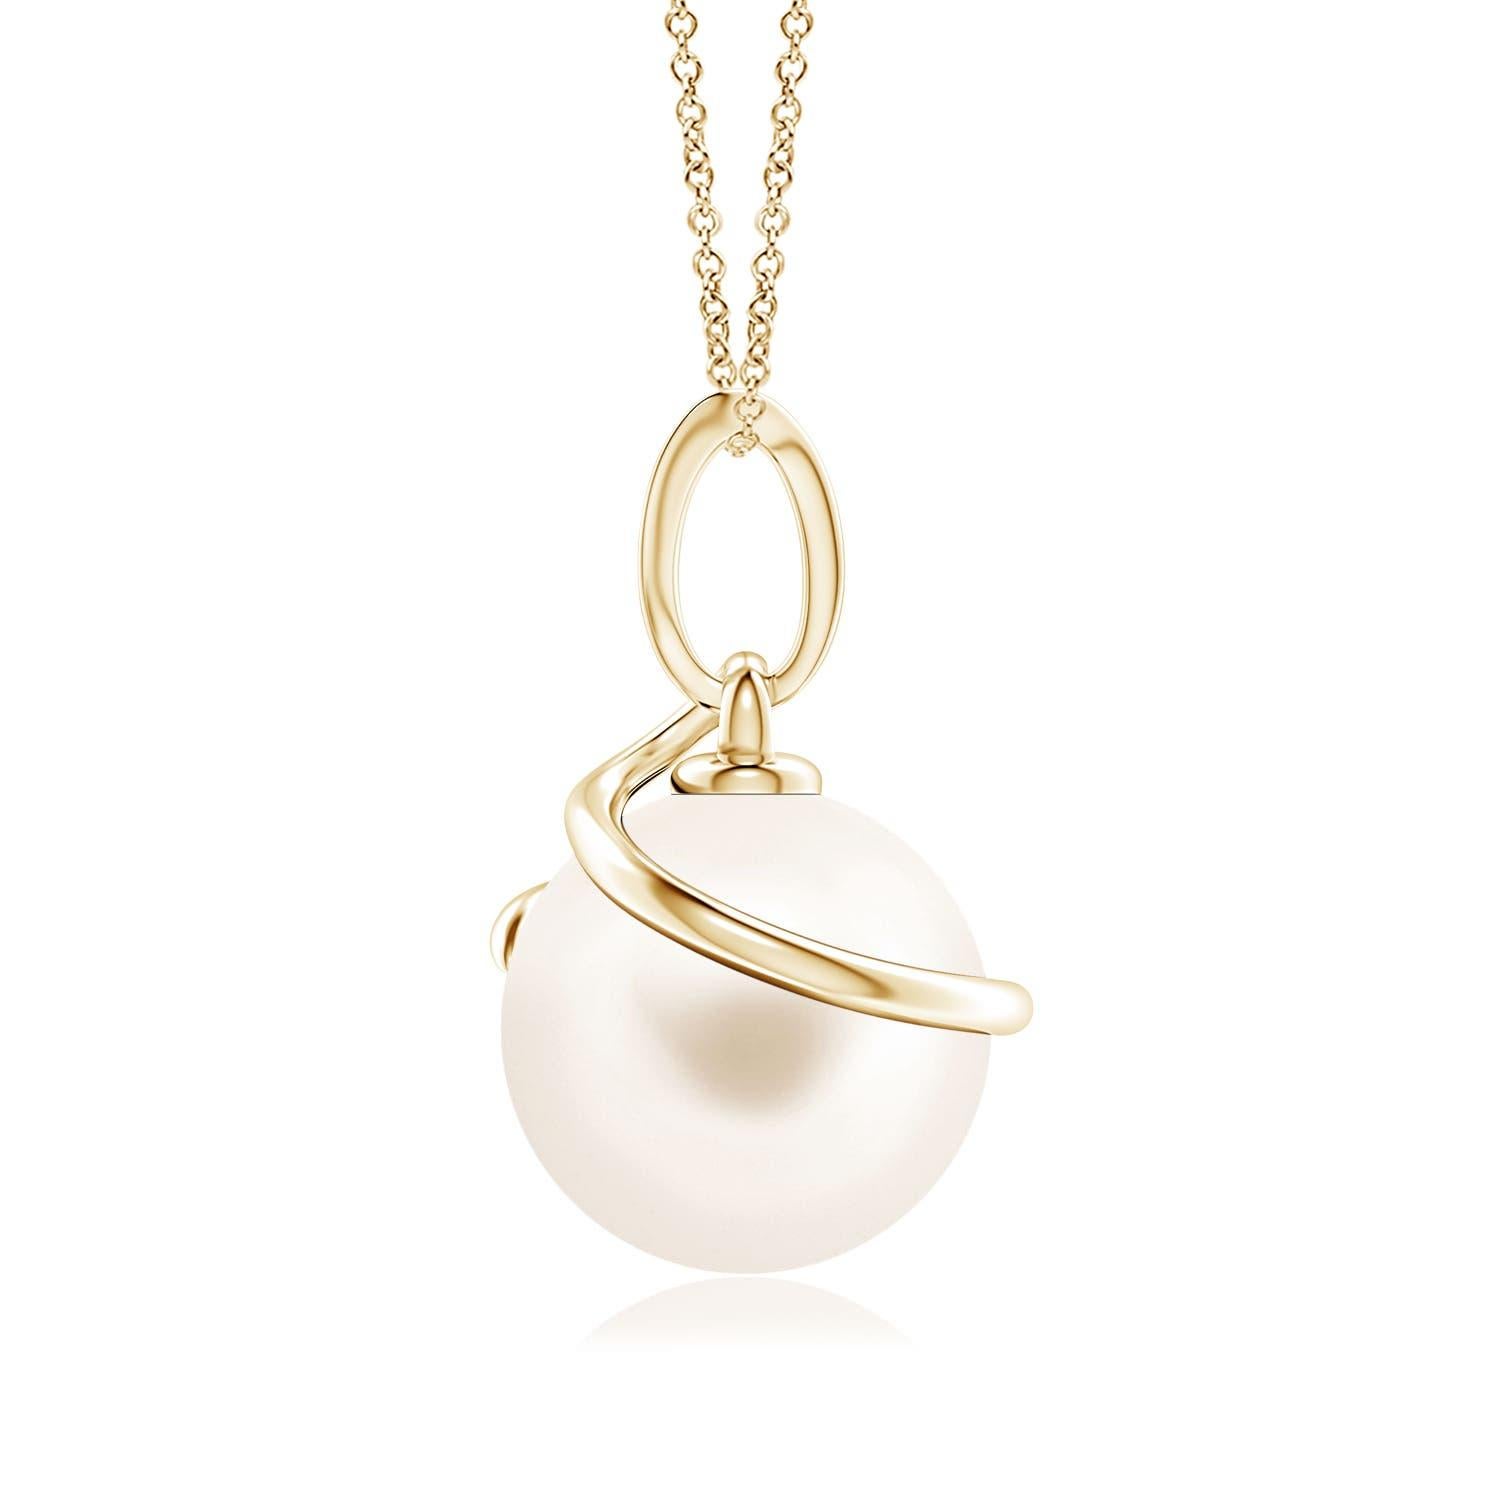 Give an elegant twist to your looks with this Freshwater cultured pearl pendant, crafted in 14k yellow gold. The beautiful pearl is wrapped by a spiral metal loop and linked to a diamond-studded bale.
Freshwater Cultured Pearl is the Birthstone for